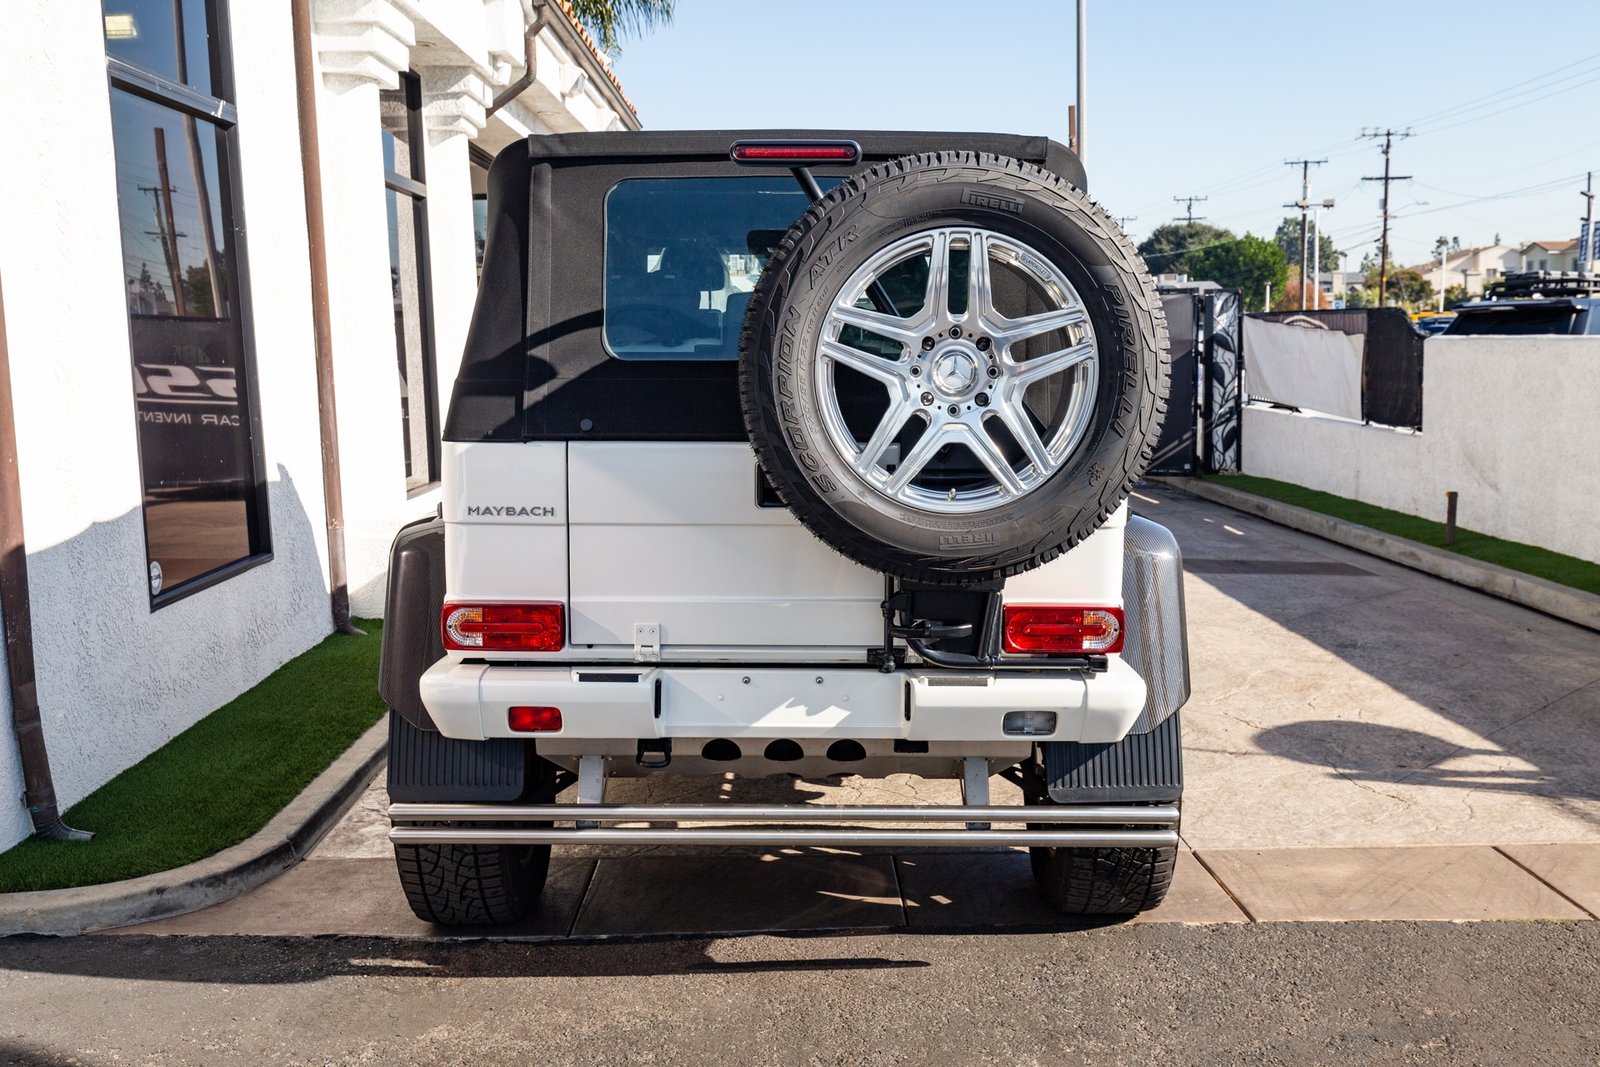 Used 2018 Mercedes-Benz G650 Maybach (2)